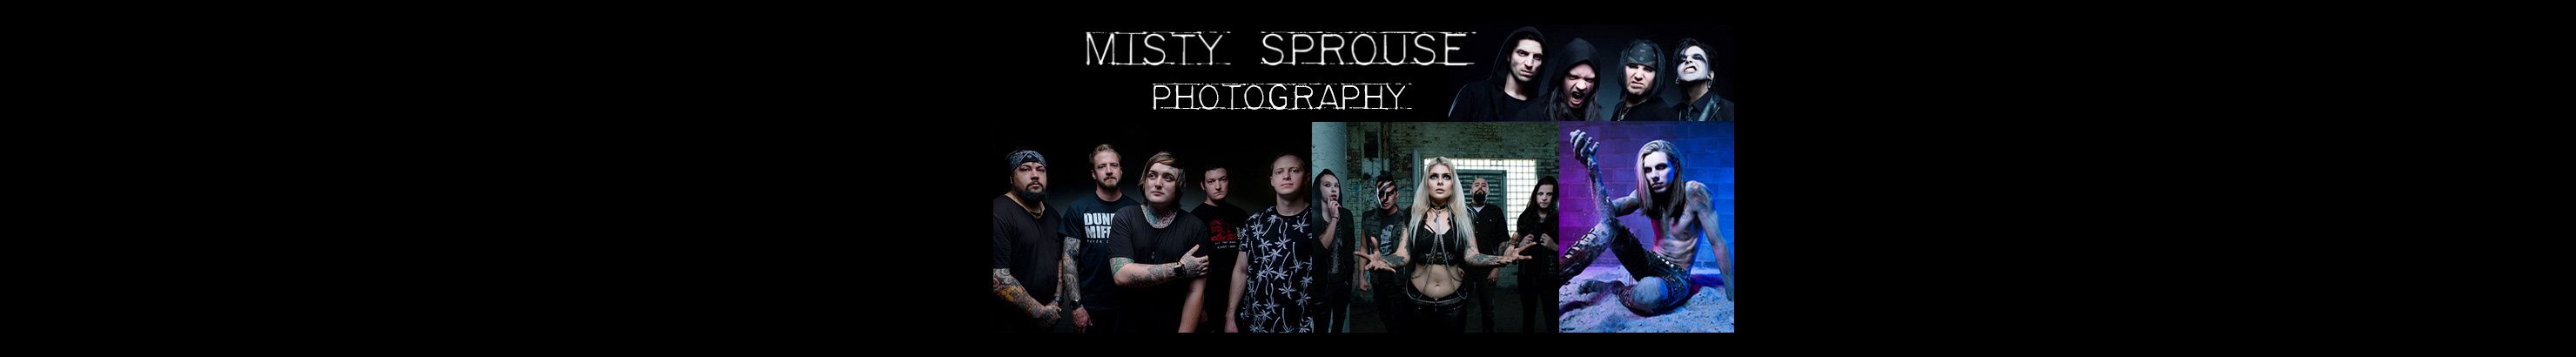 Misty Sprouses profilbanner